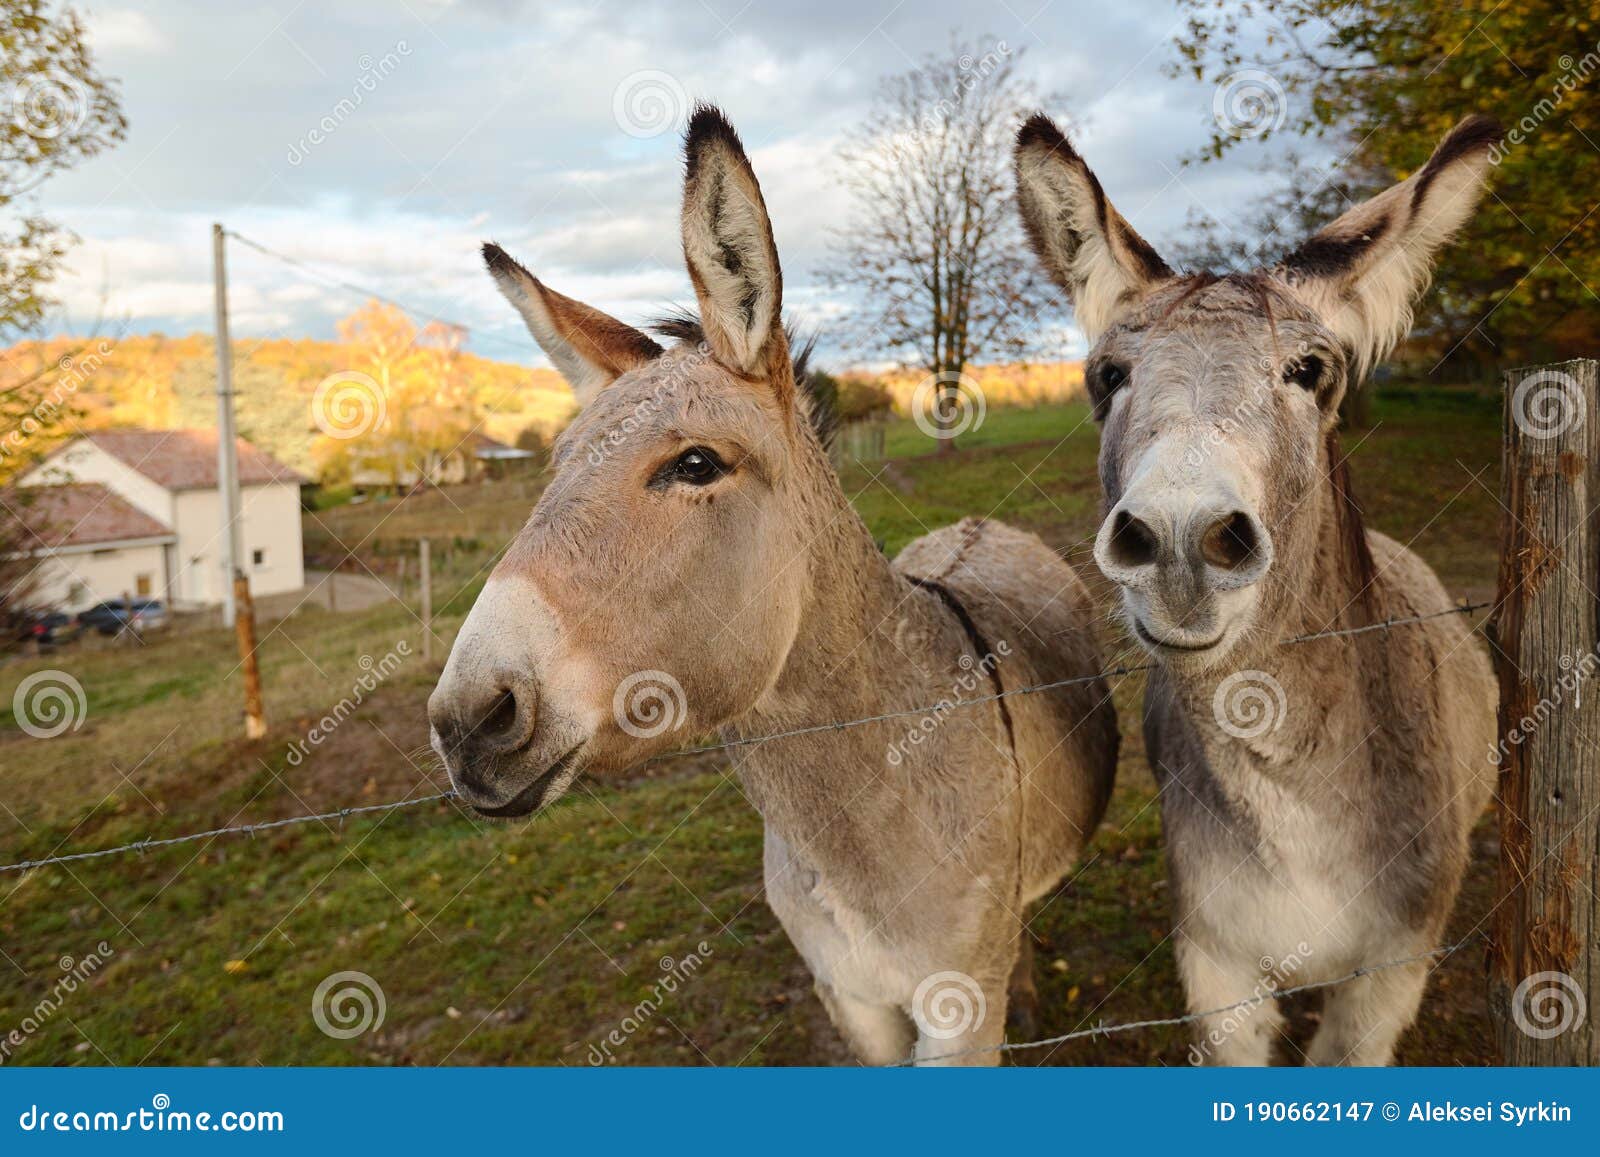 Two Donkeys on the Farm Behind the Fence Stock Image - Image of love ...